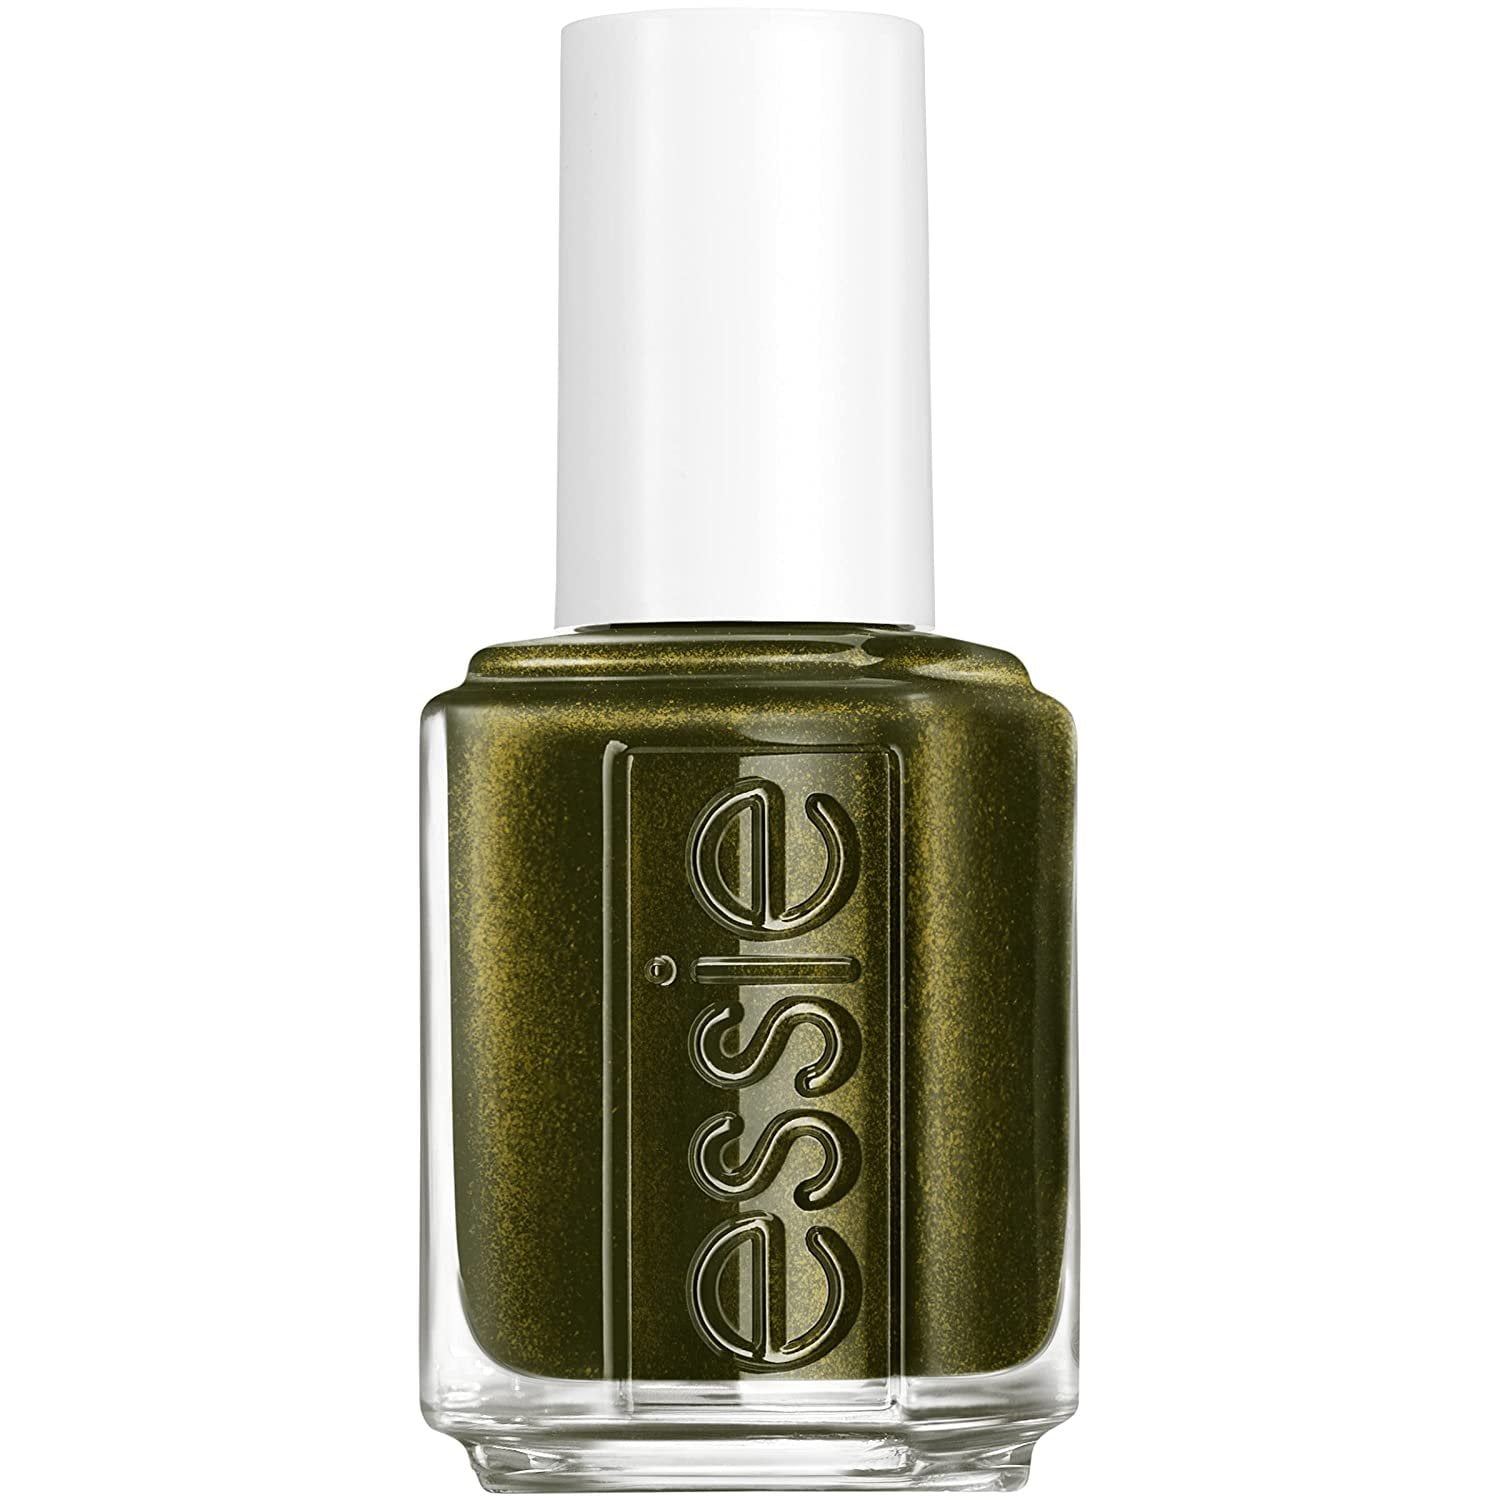 Essie essie nail polish, edition 2021 collection, warm onyx nail color with a shimmer finish, high voltage 0.46 fl. oz. - Walmart.com